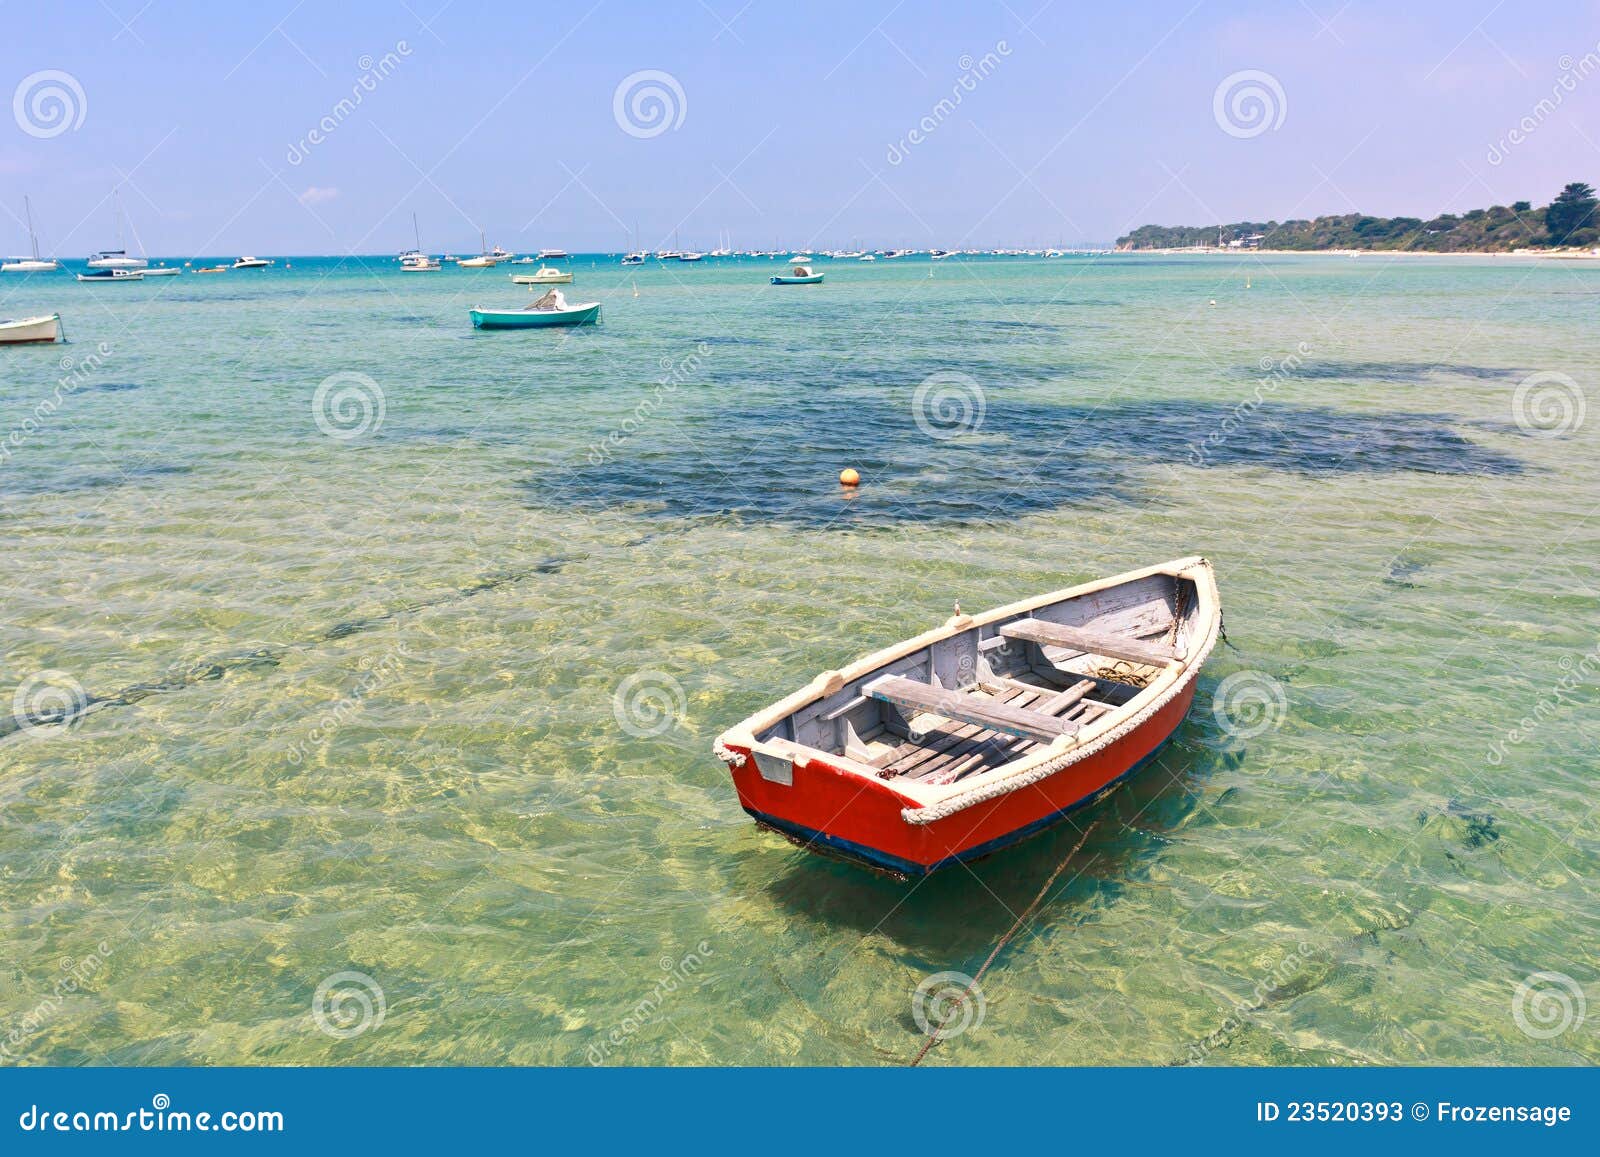 Wooden Boat In Shallow Water Stock Photos - Image: 23520393